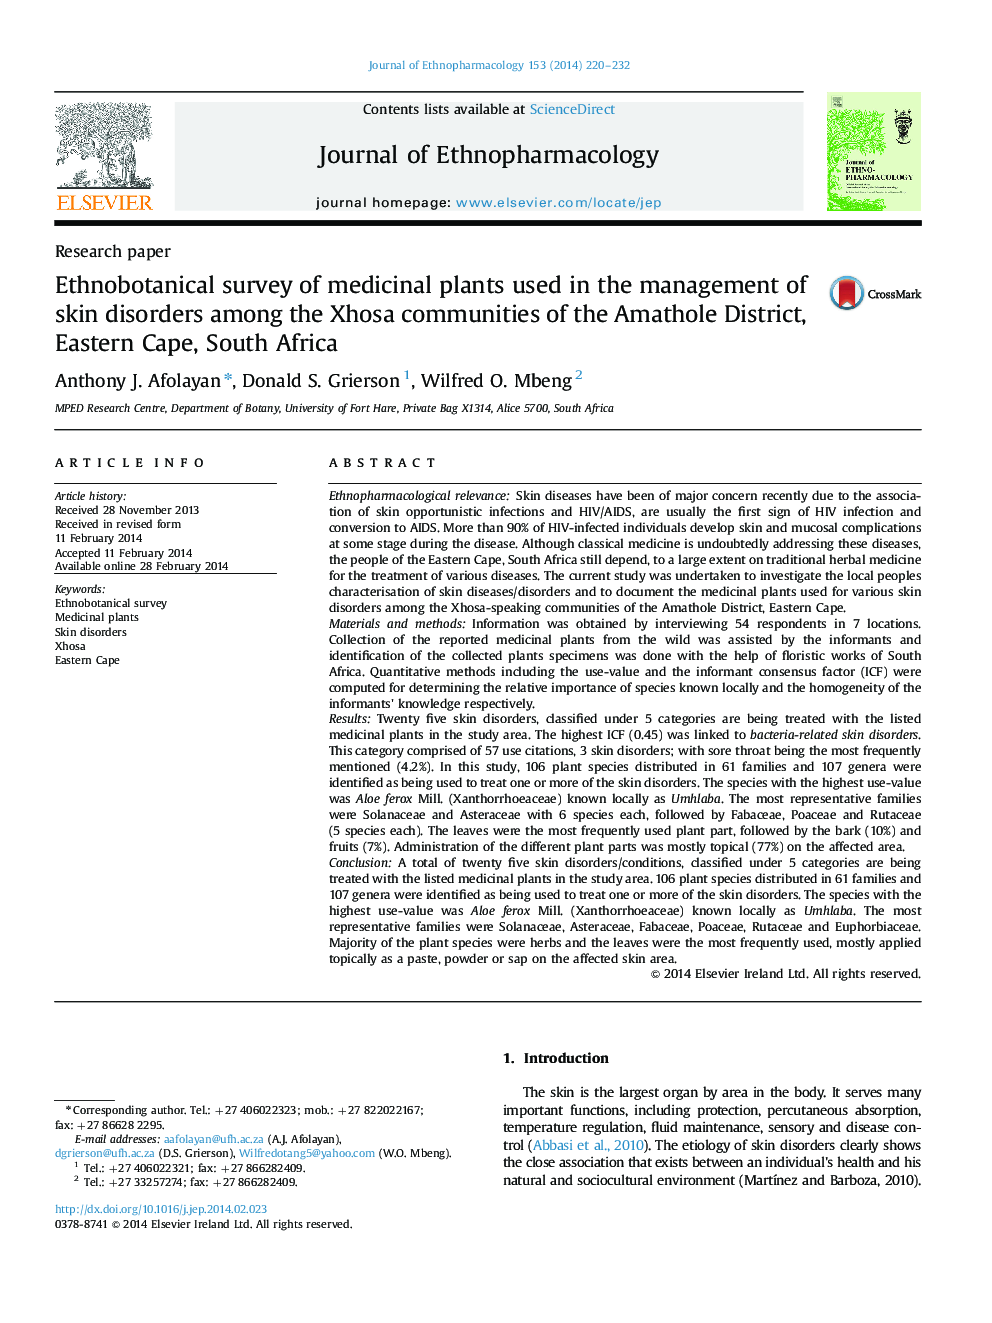 Ethnobotanical survey of medicinal plants used in the management of skin disorders among the Xhosa communities of the Amathole District, Eastern Cape, South Africa